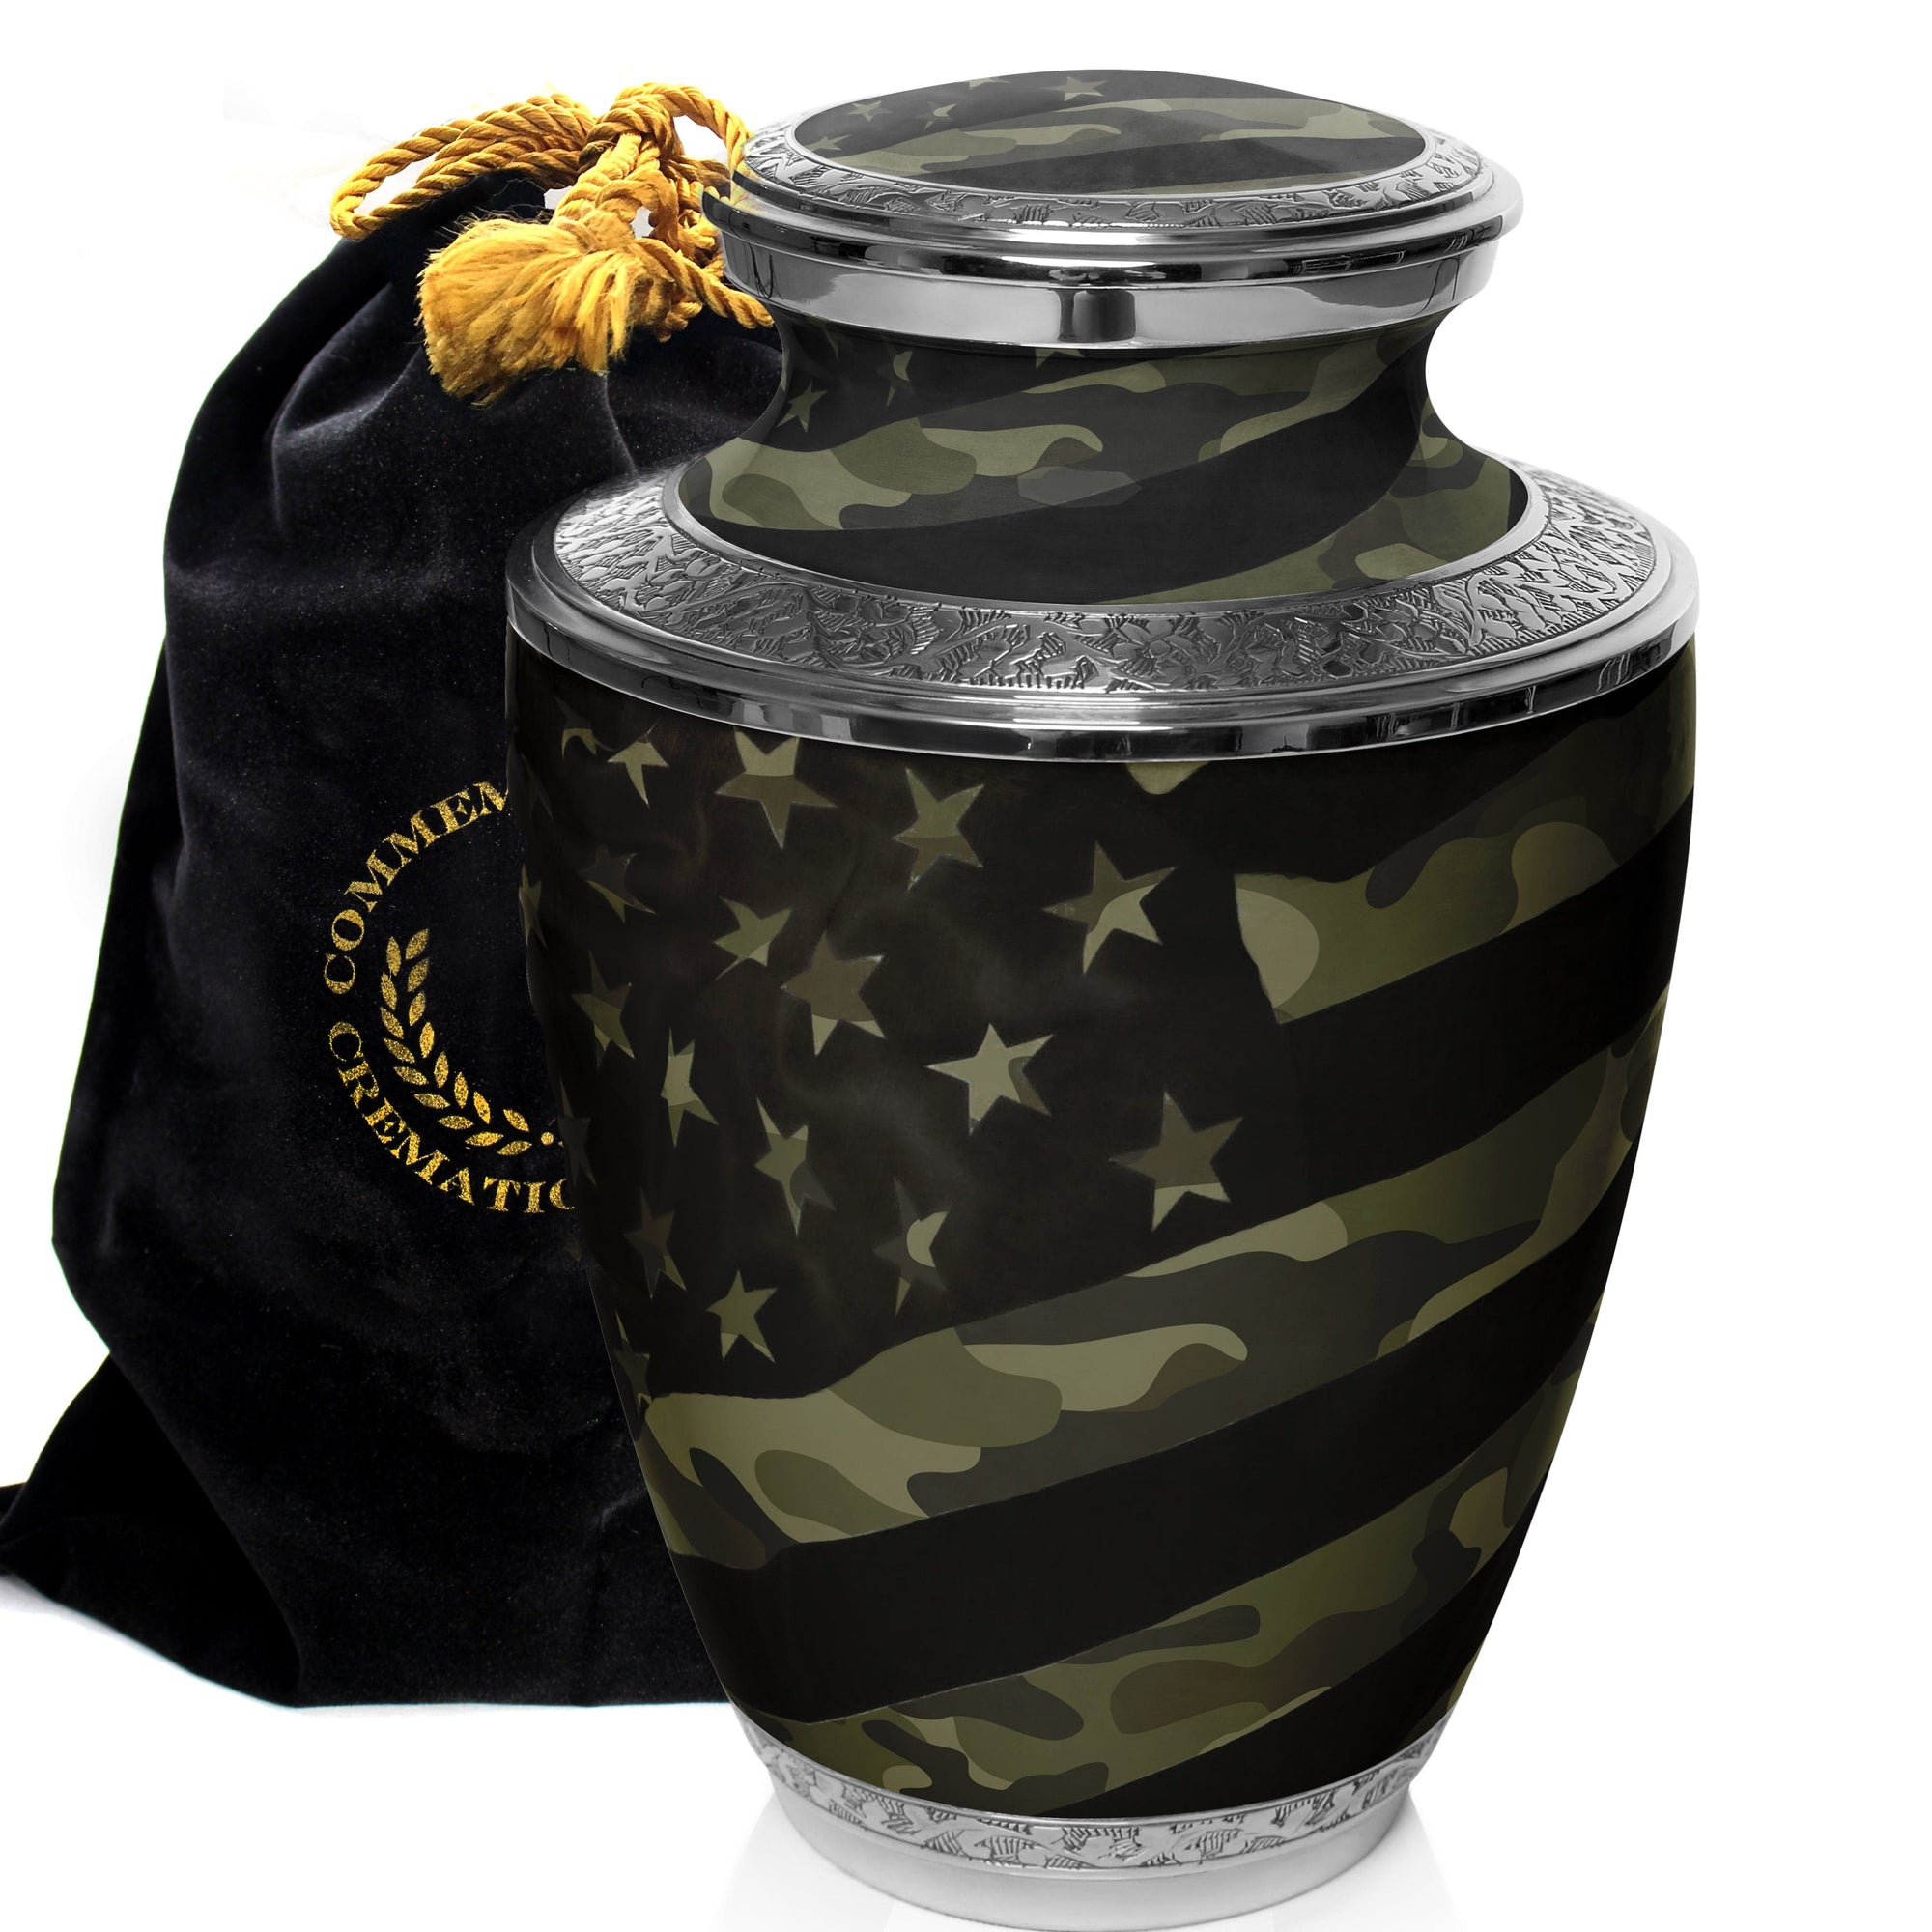 Commemorative Cremation Urns Home & Garden Traditional Camouflage Flag Military Cremation Urn